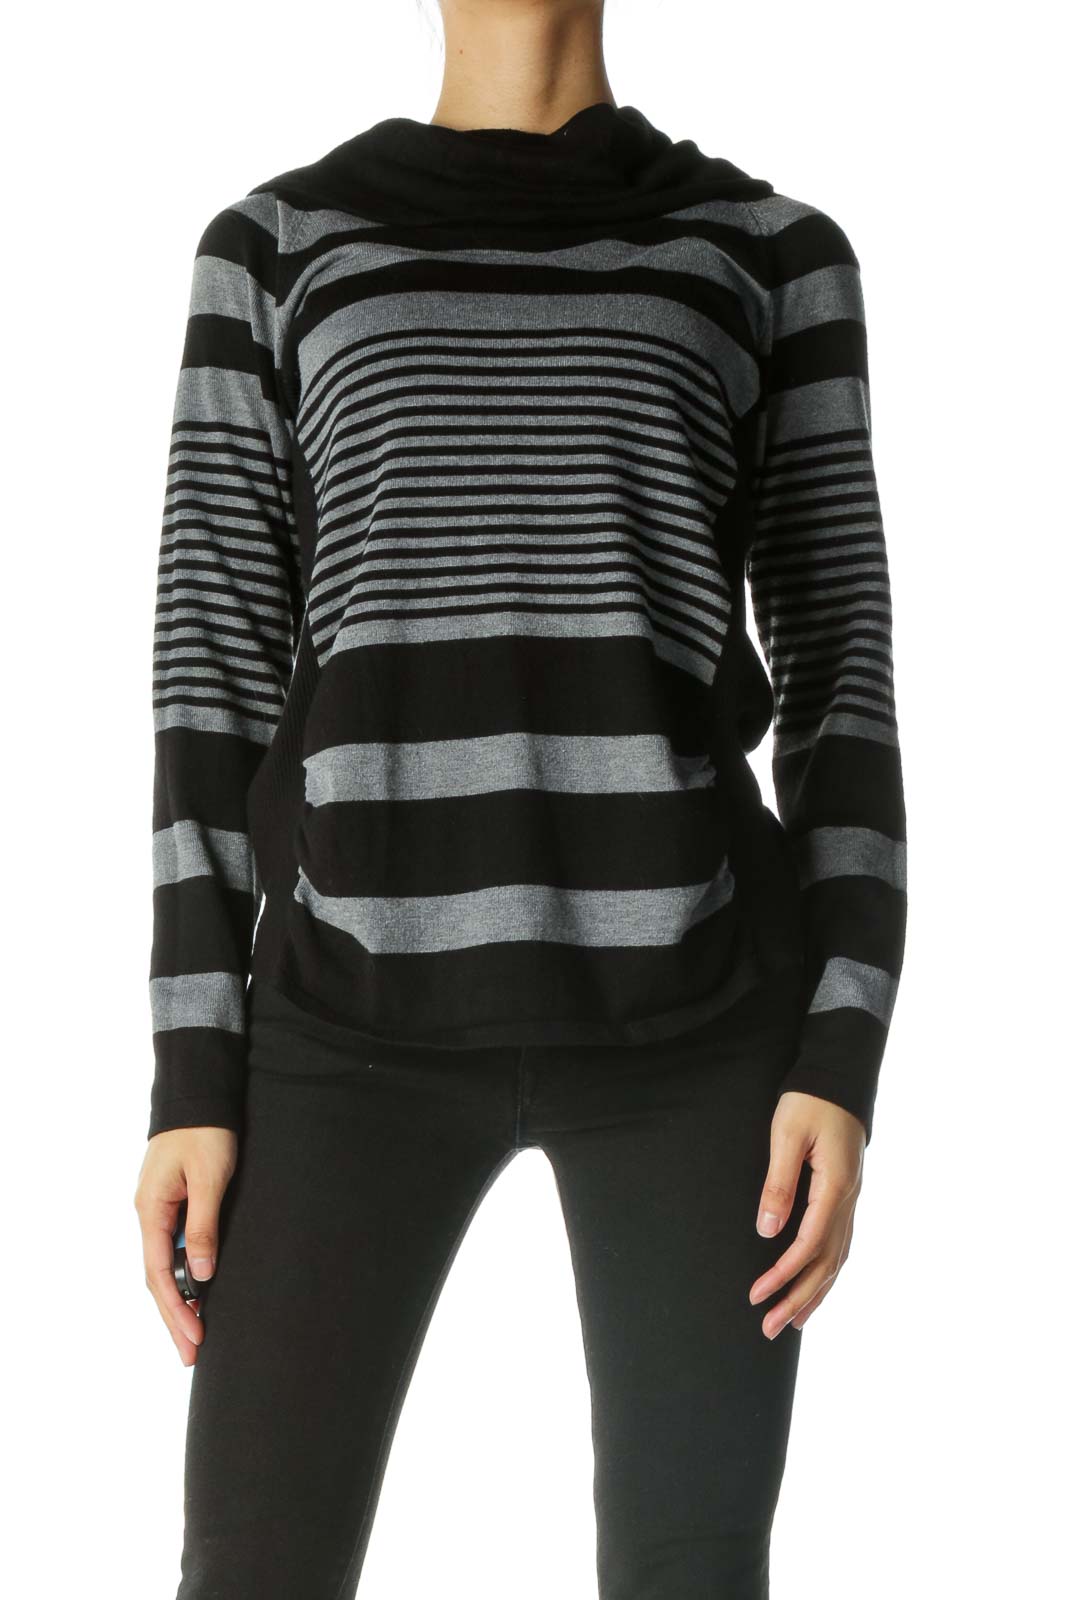 Black Gray Cowl Neck Striped Sweater Front